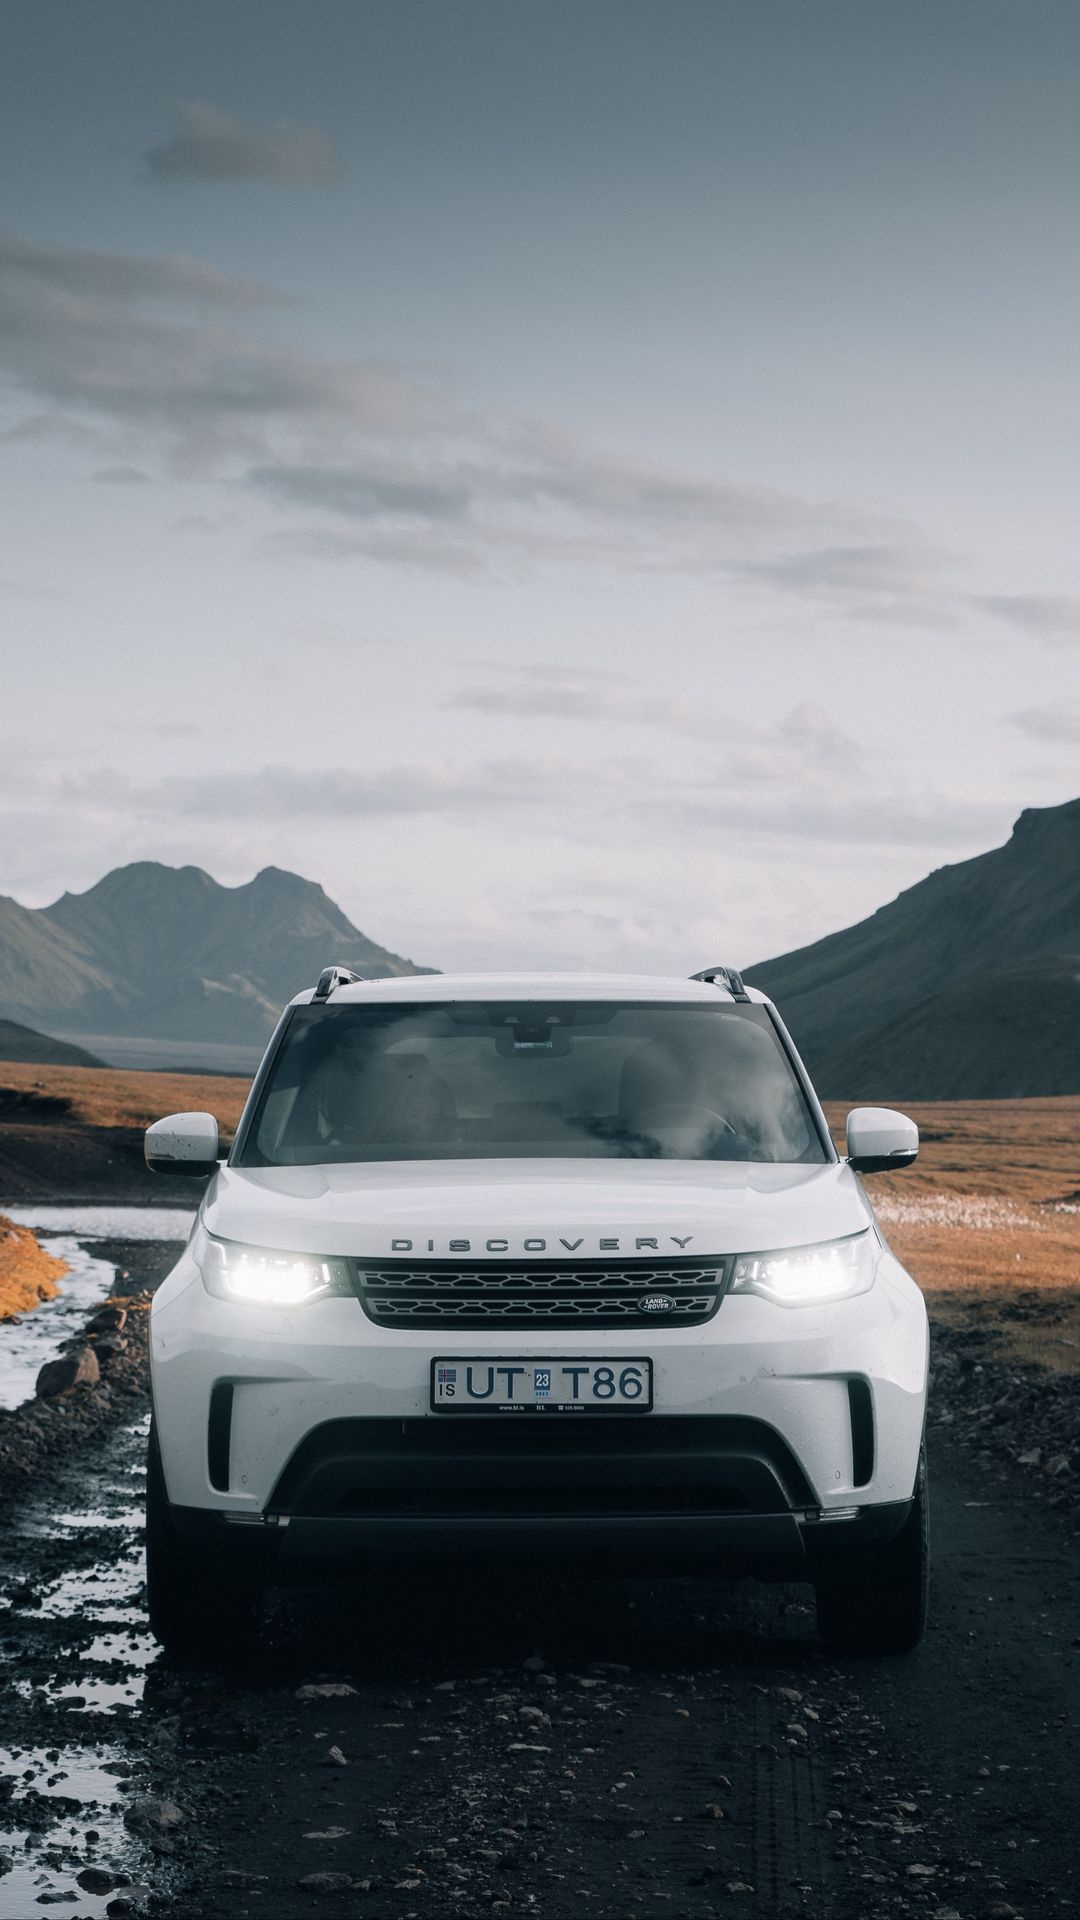 Land Rover Discovery, Captivating 4K HD wallpapers, Adventure at your fingertips, 1080x1920 Full HD Handy